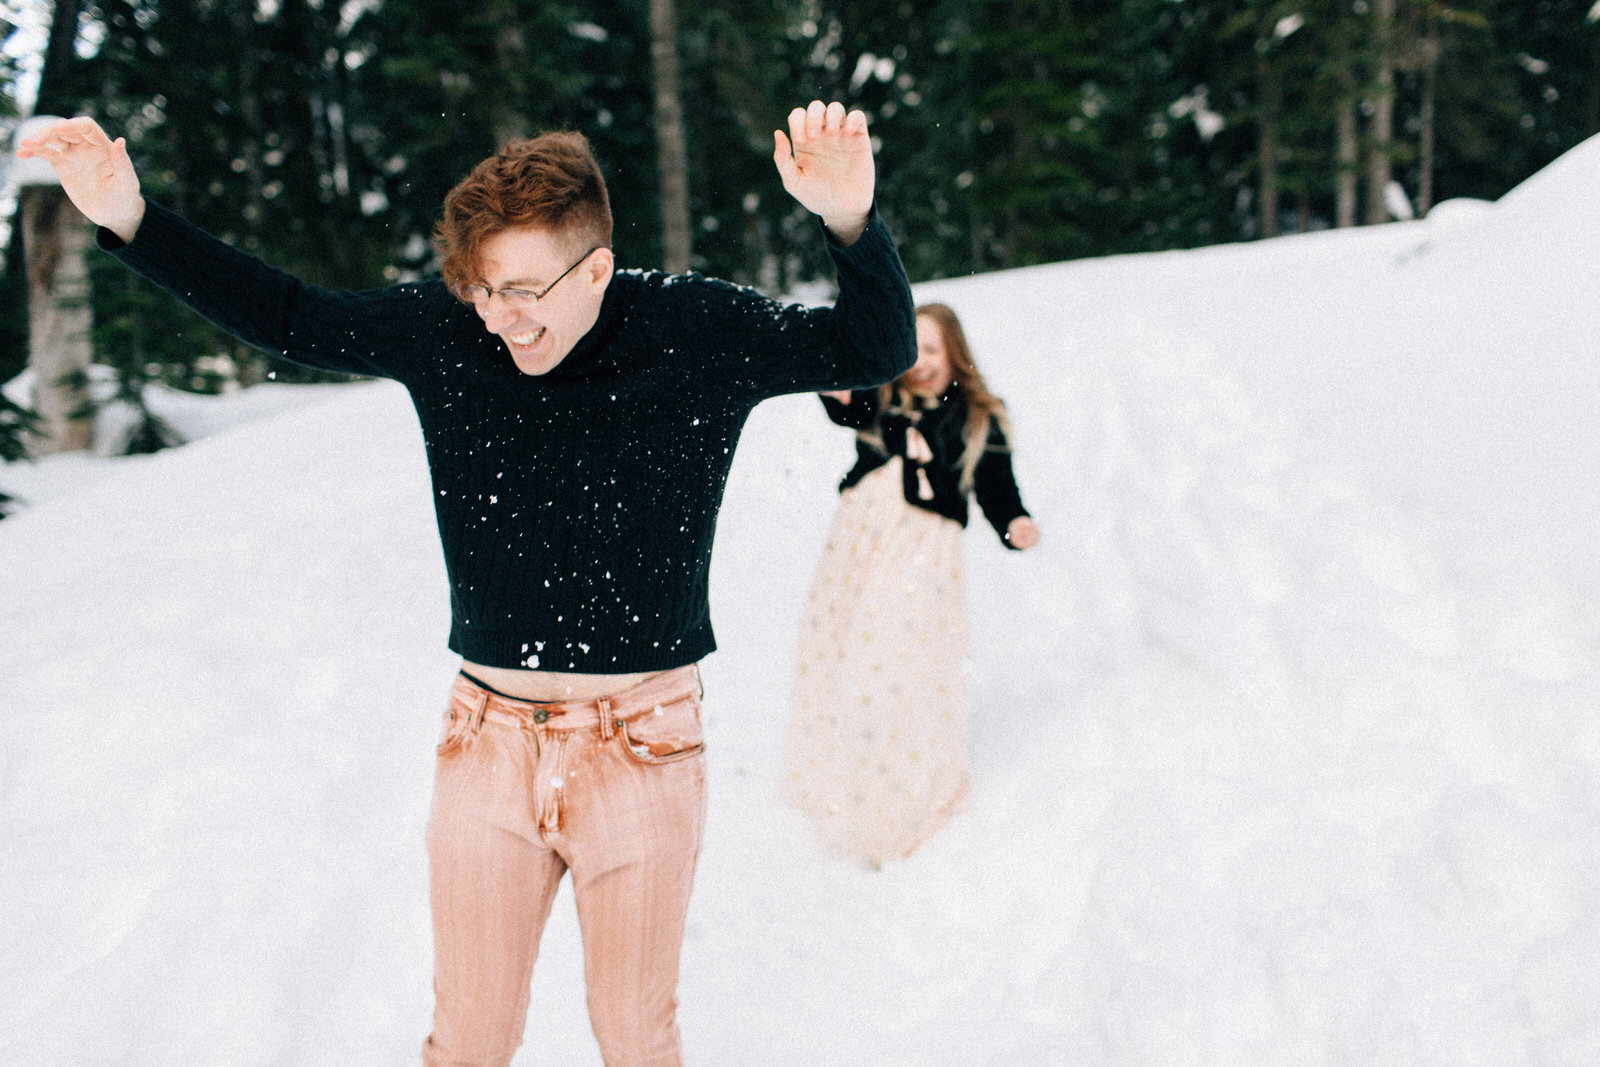 Snoqualmie Pass fuck yeah weddings engagement session snow mountains kendall shea feminist phtographer